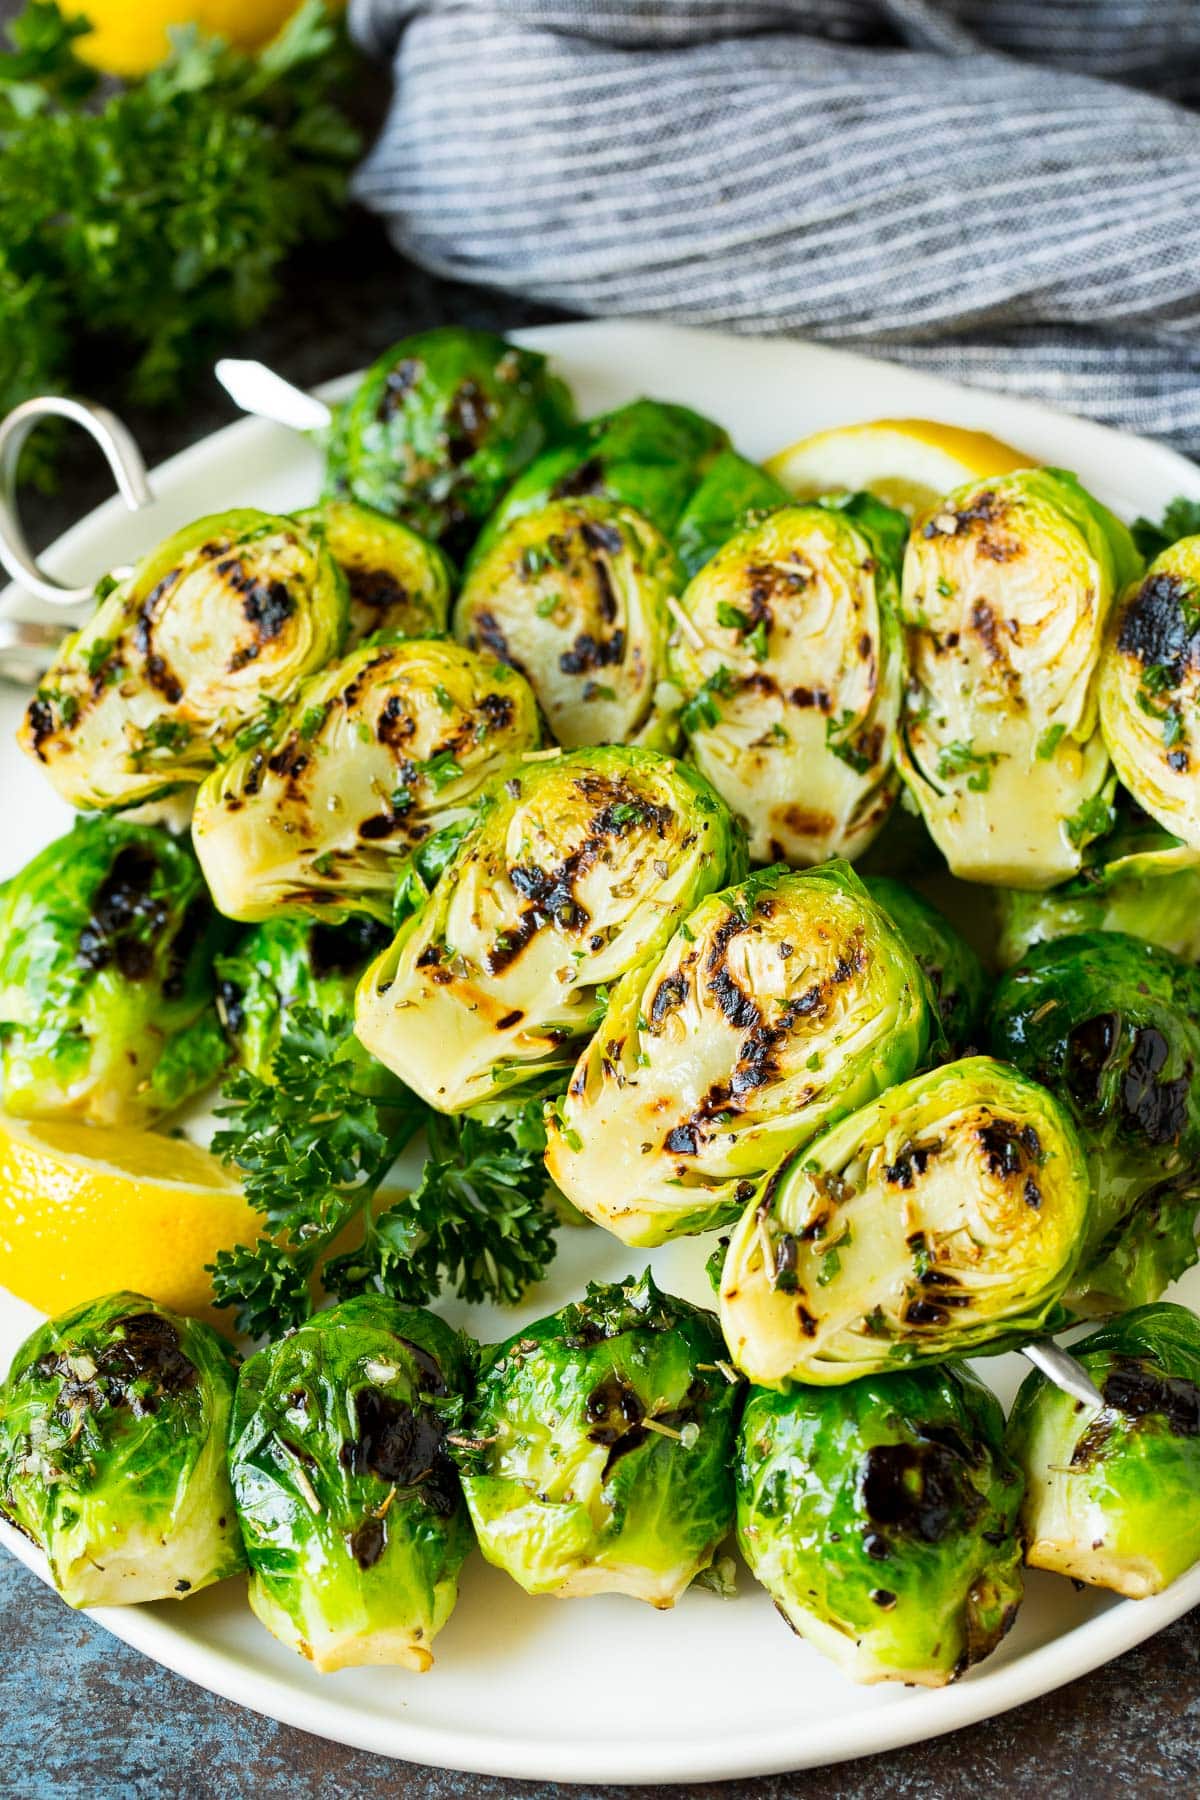 Grilled brussels sprouts on skewers served with lemon and parsley.